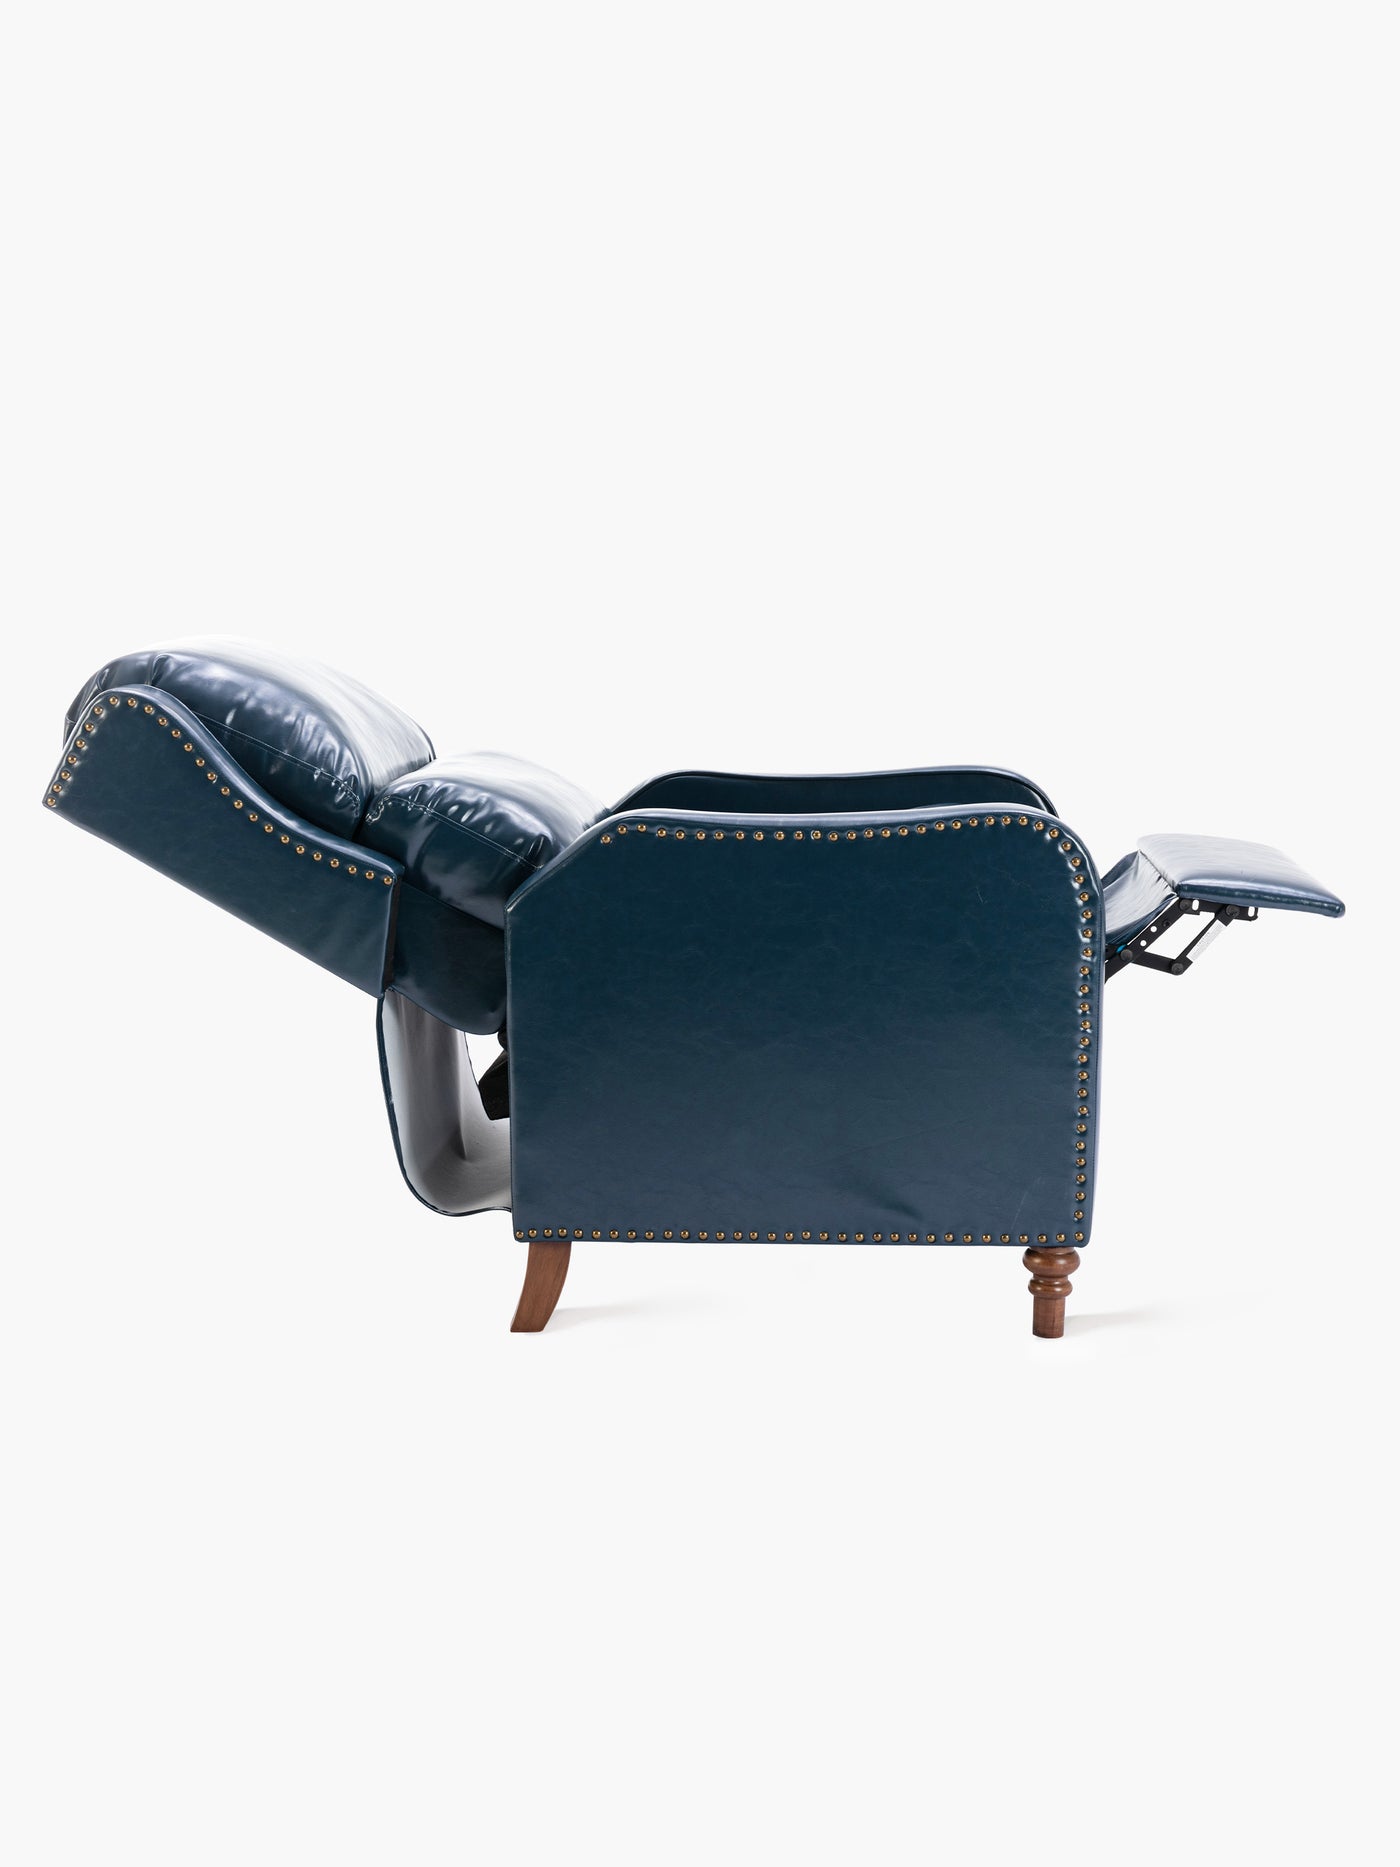 COLAMY Adjustable Arm Chair for Home Theater Navy Blue #color_navyblue